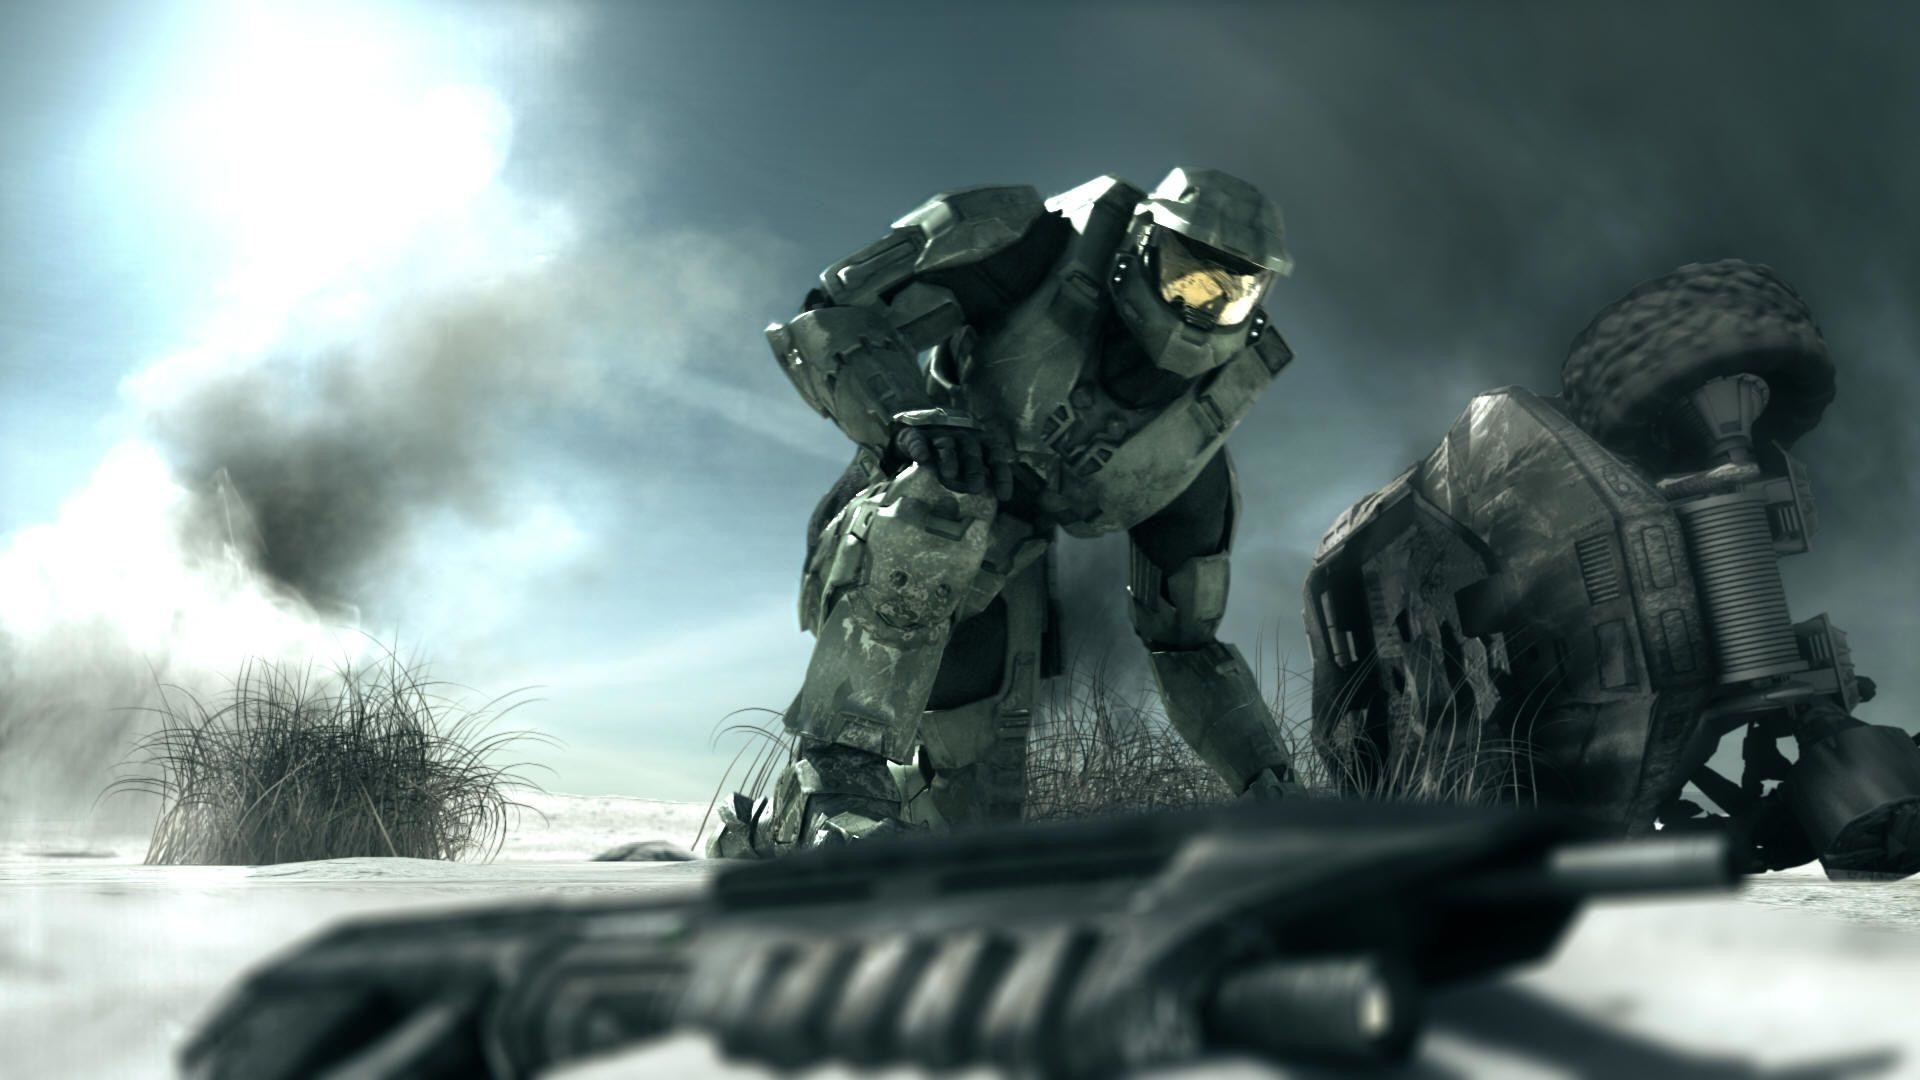 1920x1080 Wallpapers For > Halo 5 Master Chief Wallpaper Hd